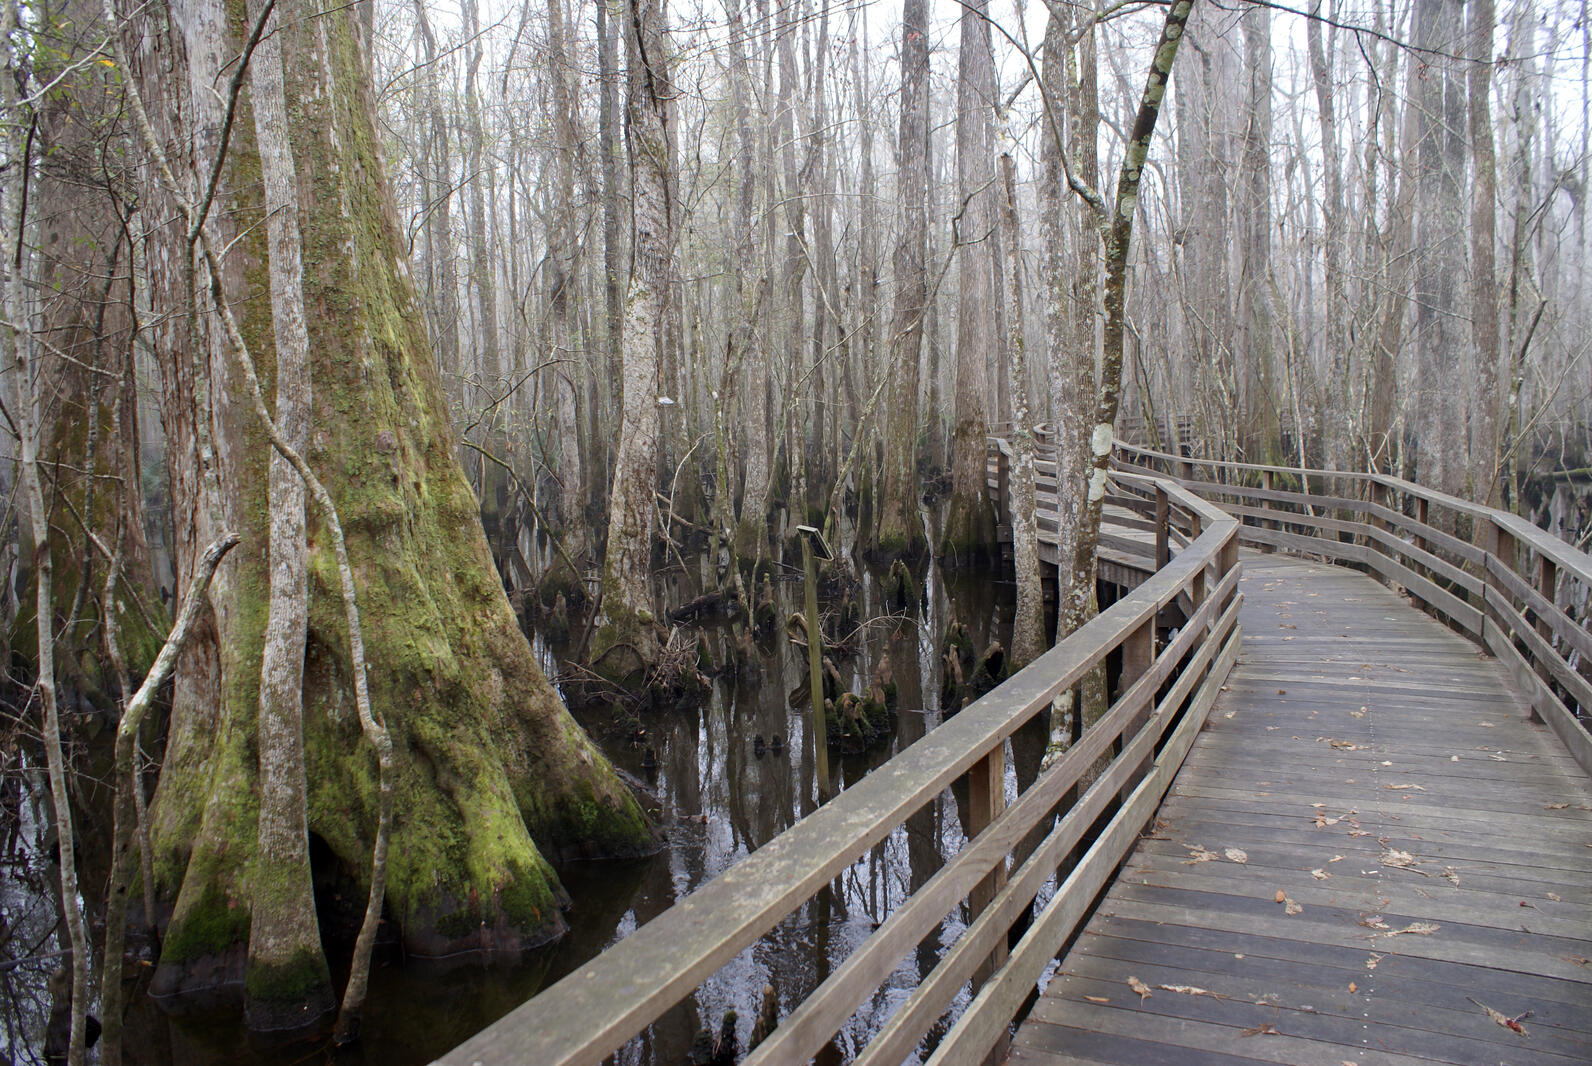 The Beidler boardwalk angles towards the right and then curves to the left. Trees covered in thick moss rise from the water next to it, devoid of leaves, a sign of winter.